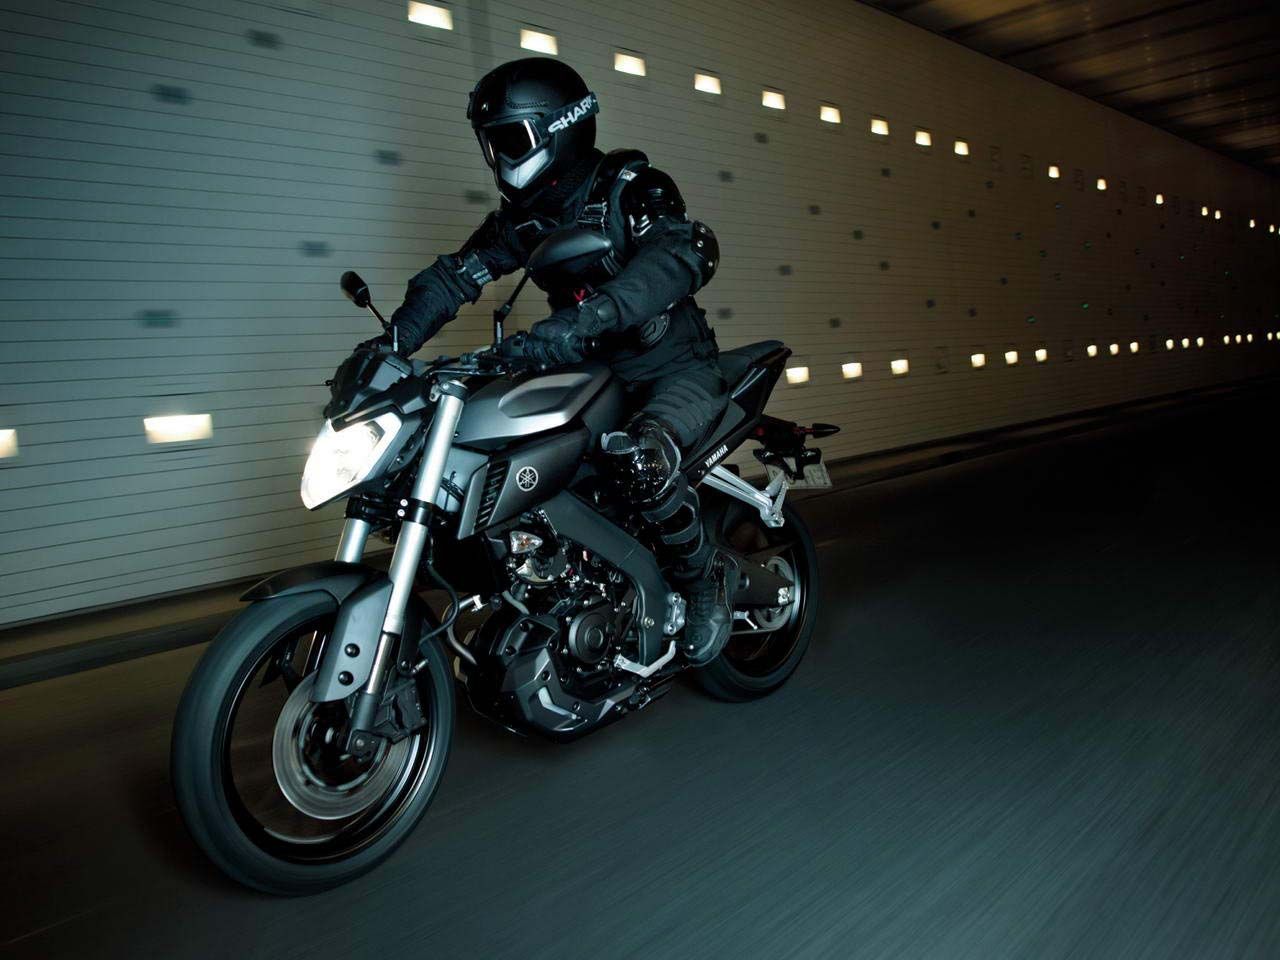 Yamaha MT 125 Specs Image And Pricing